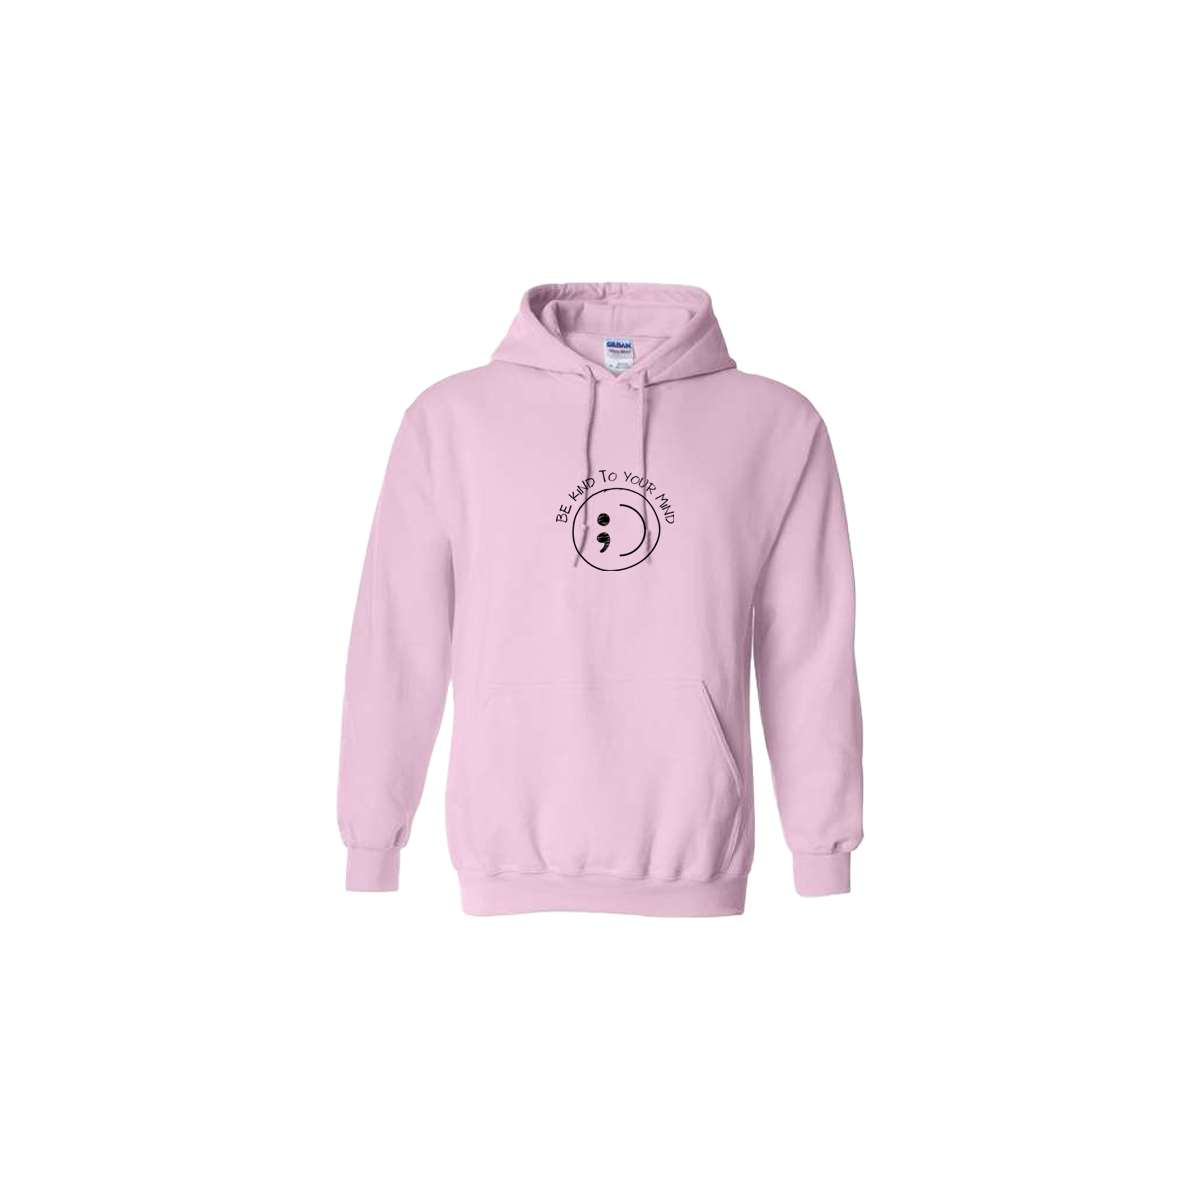 Be Kind To Your Mind Smiley Face Embroidered Light Pink Hoodie - Mental Health Awareness Clothing